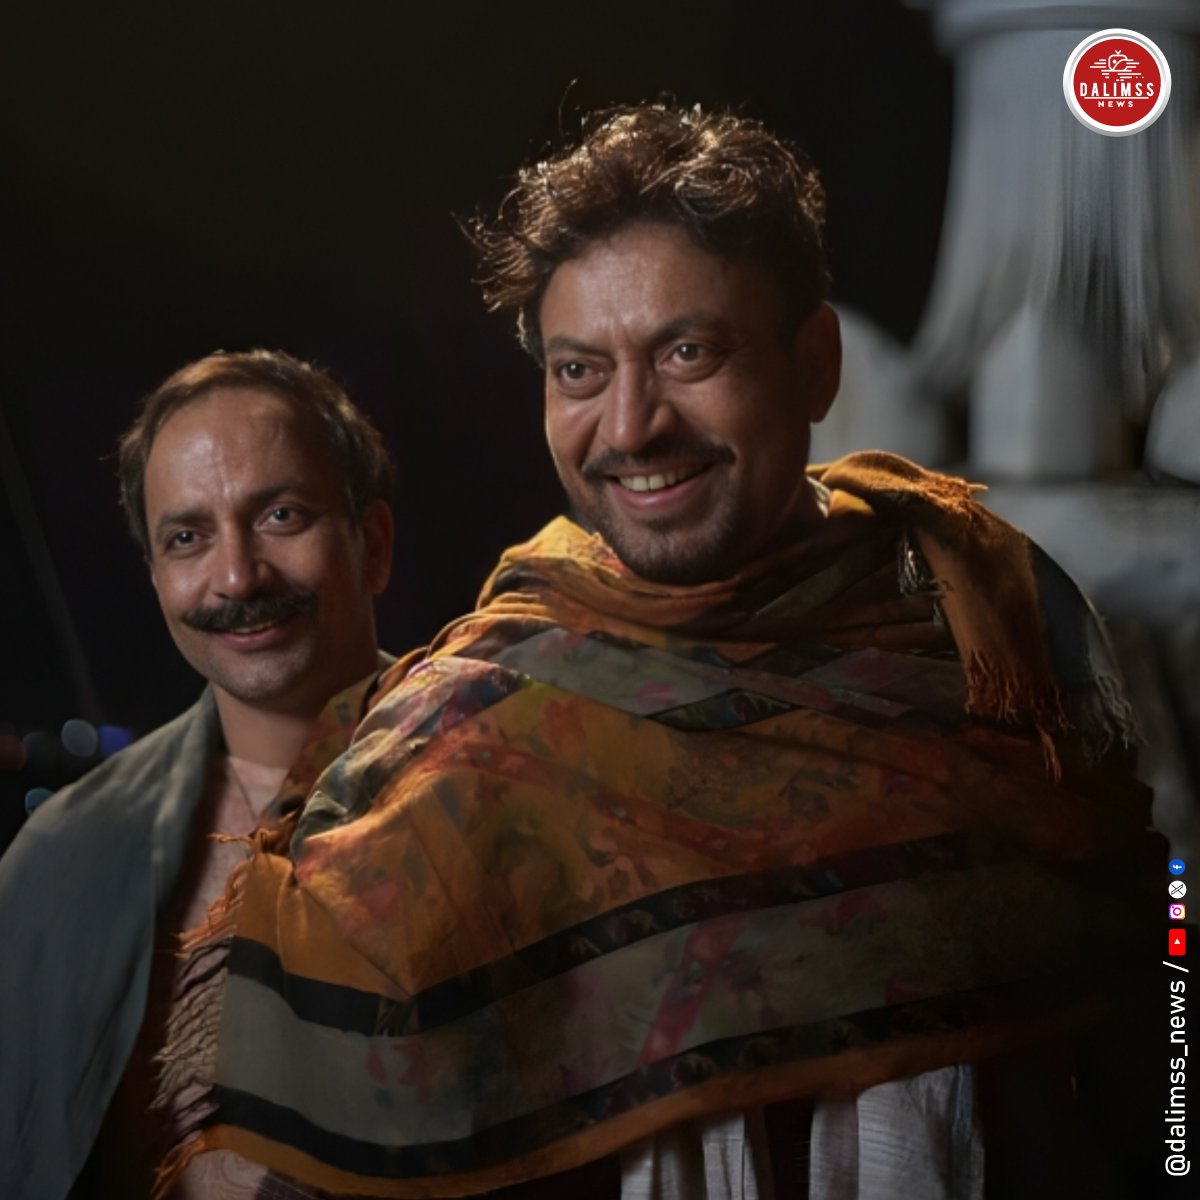 Babil Khan, following in the footsteps of his late father Irrfan Khan, reminisced about the lessons his father imparted to him. 
#BabilKhan #IrrfanKhan #FatherSonBond #LessonsLearned #Family